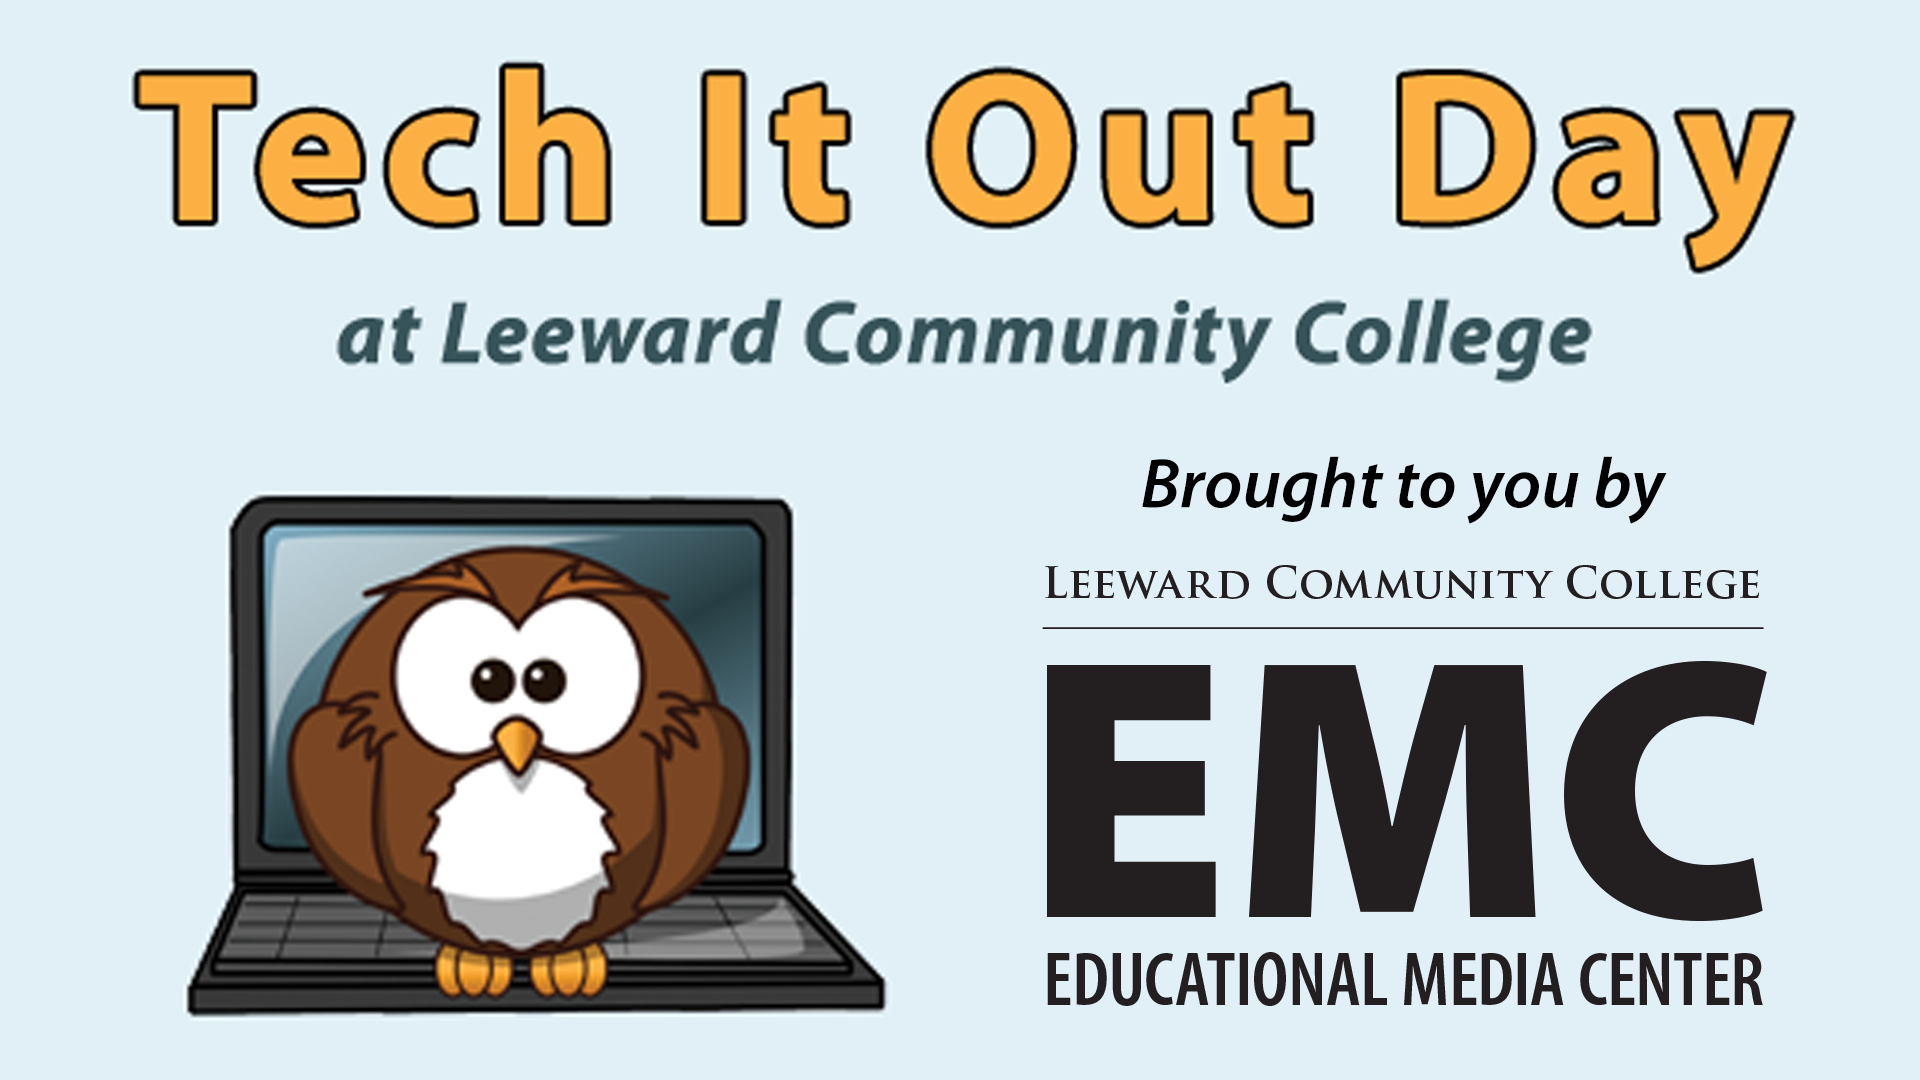 Tech it out day at Leeward CC, brought to you by Educational Media Center